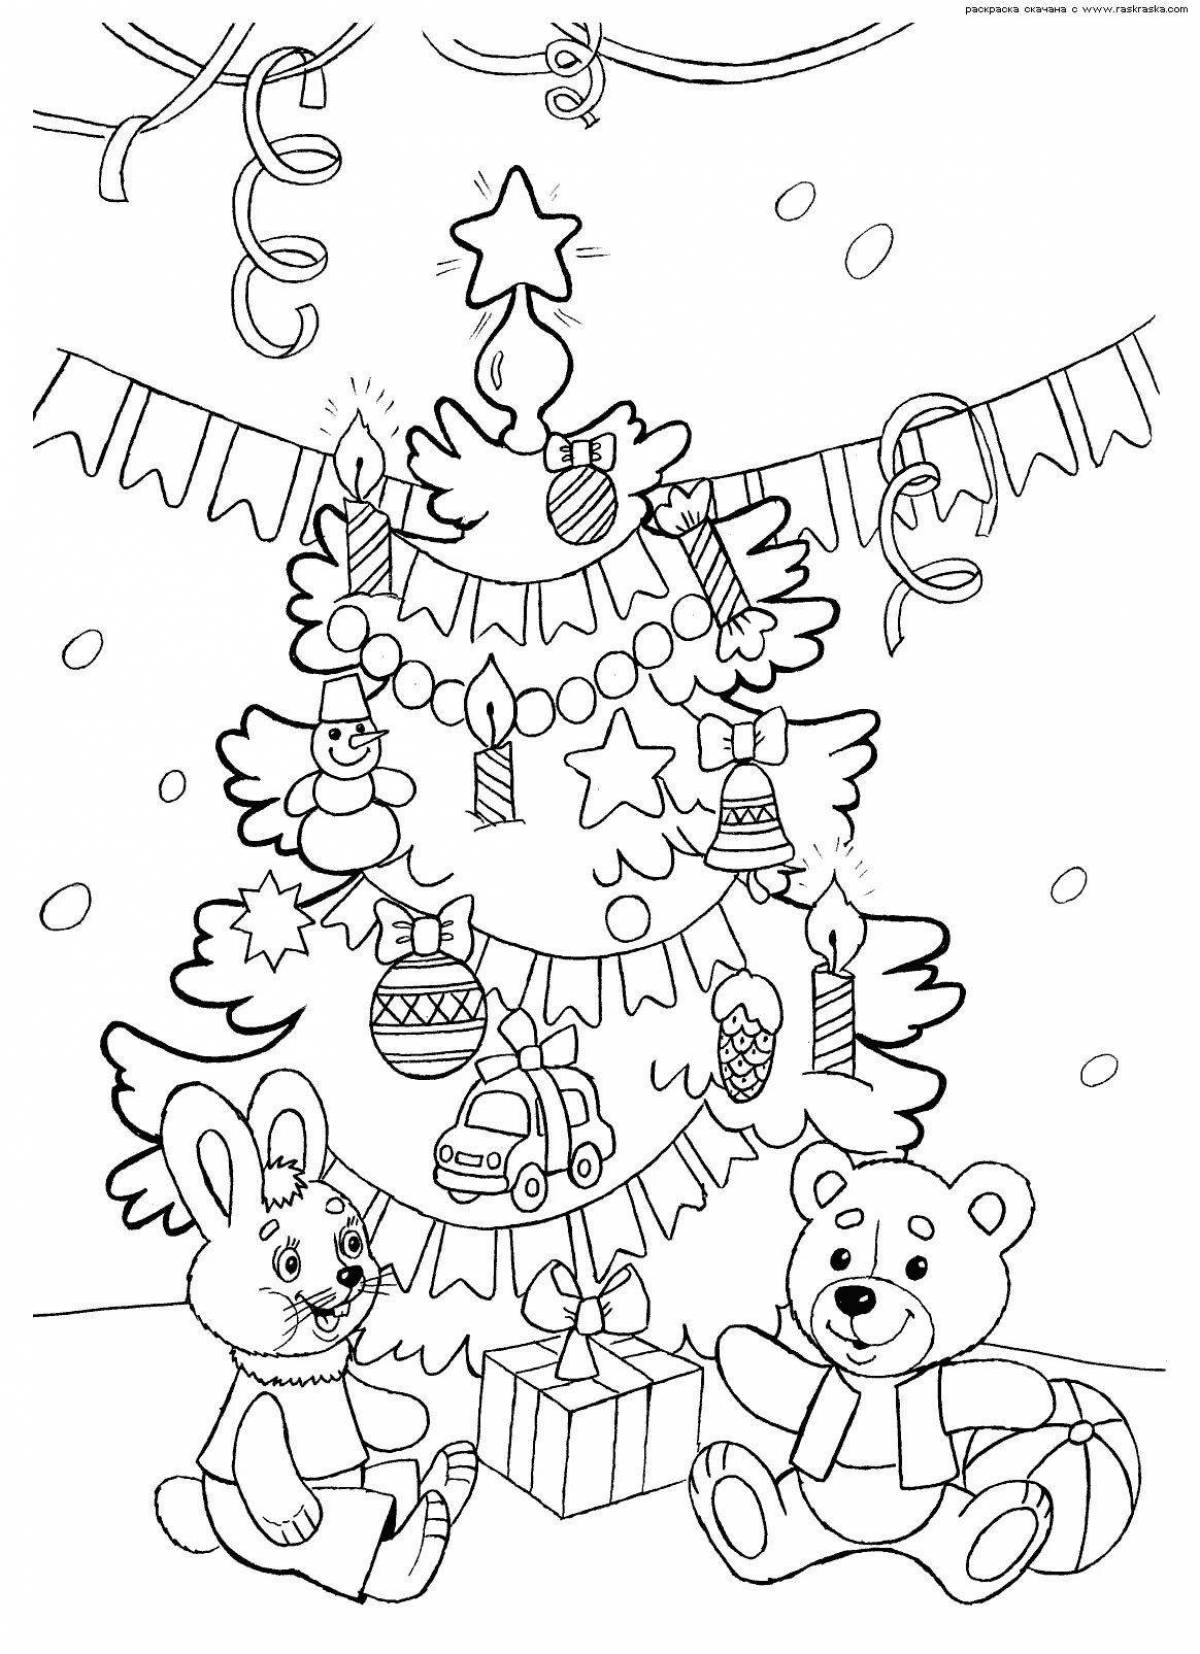 Playful Christmas tree with toys